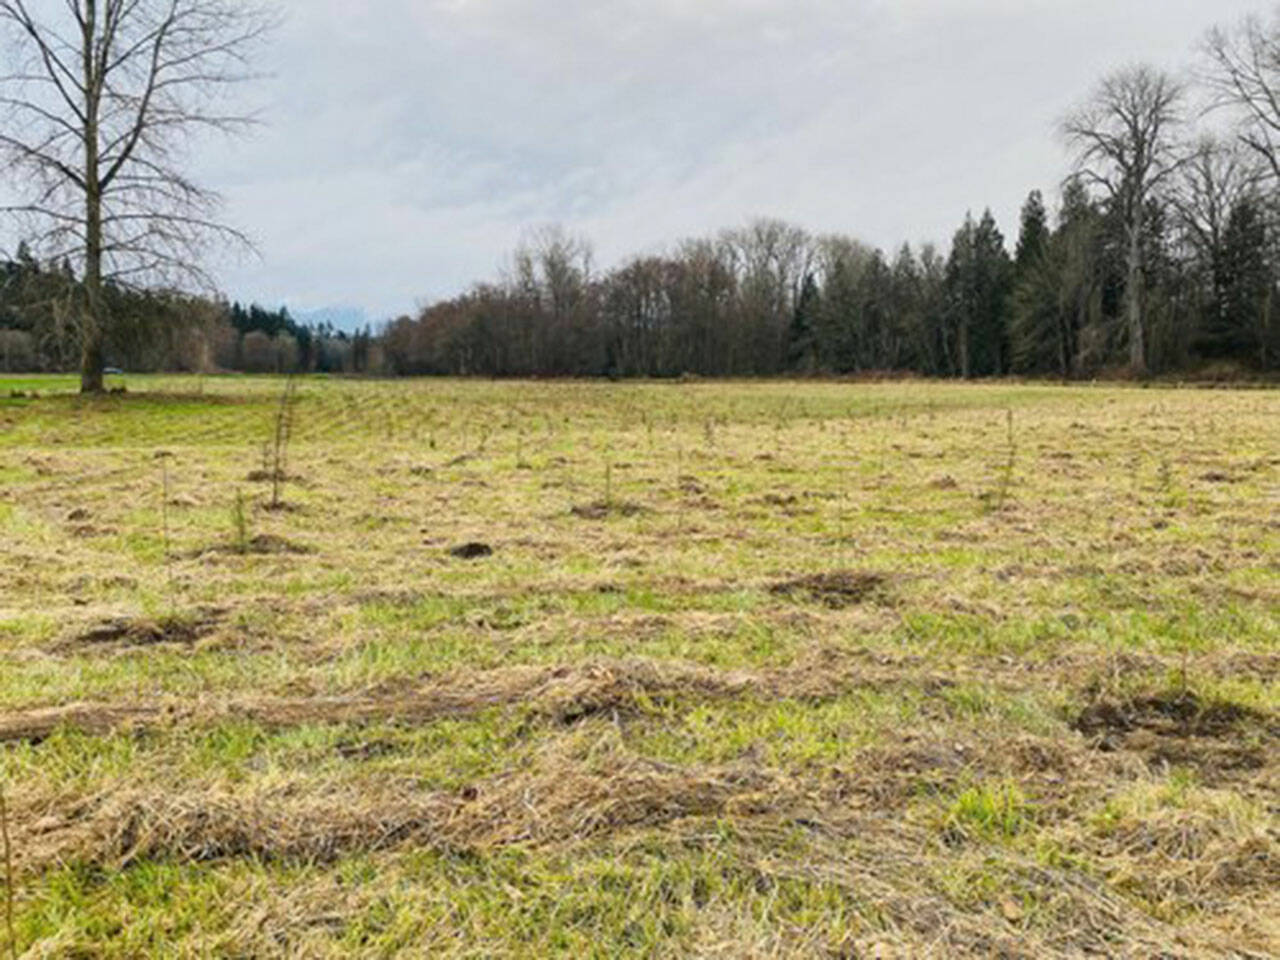 Volunteers are sought to help plant and install plant protectors along the Dungeness River — helping to restore a portion of a 52-acre of floodplain that will soon be reconnected to the Dungeness River following setback of a levee. Photo courtesy of Clallam Conservation District